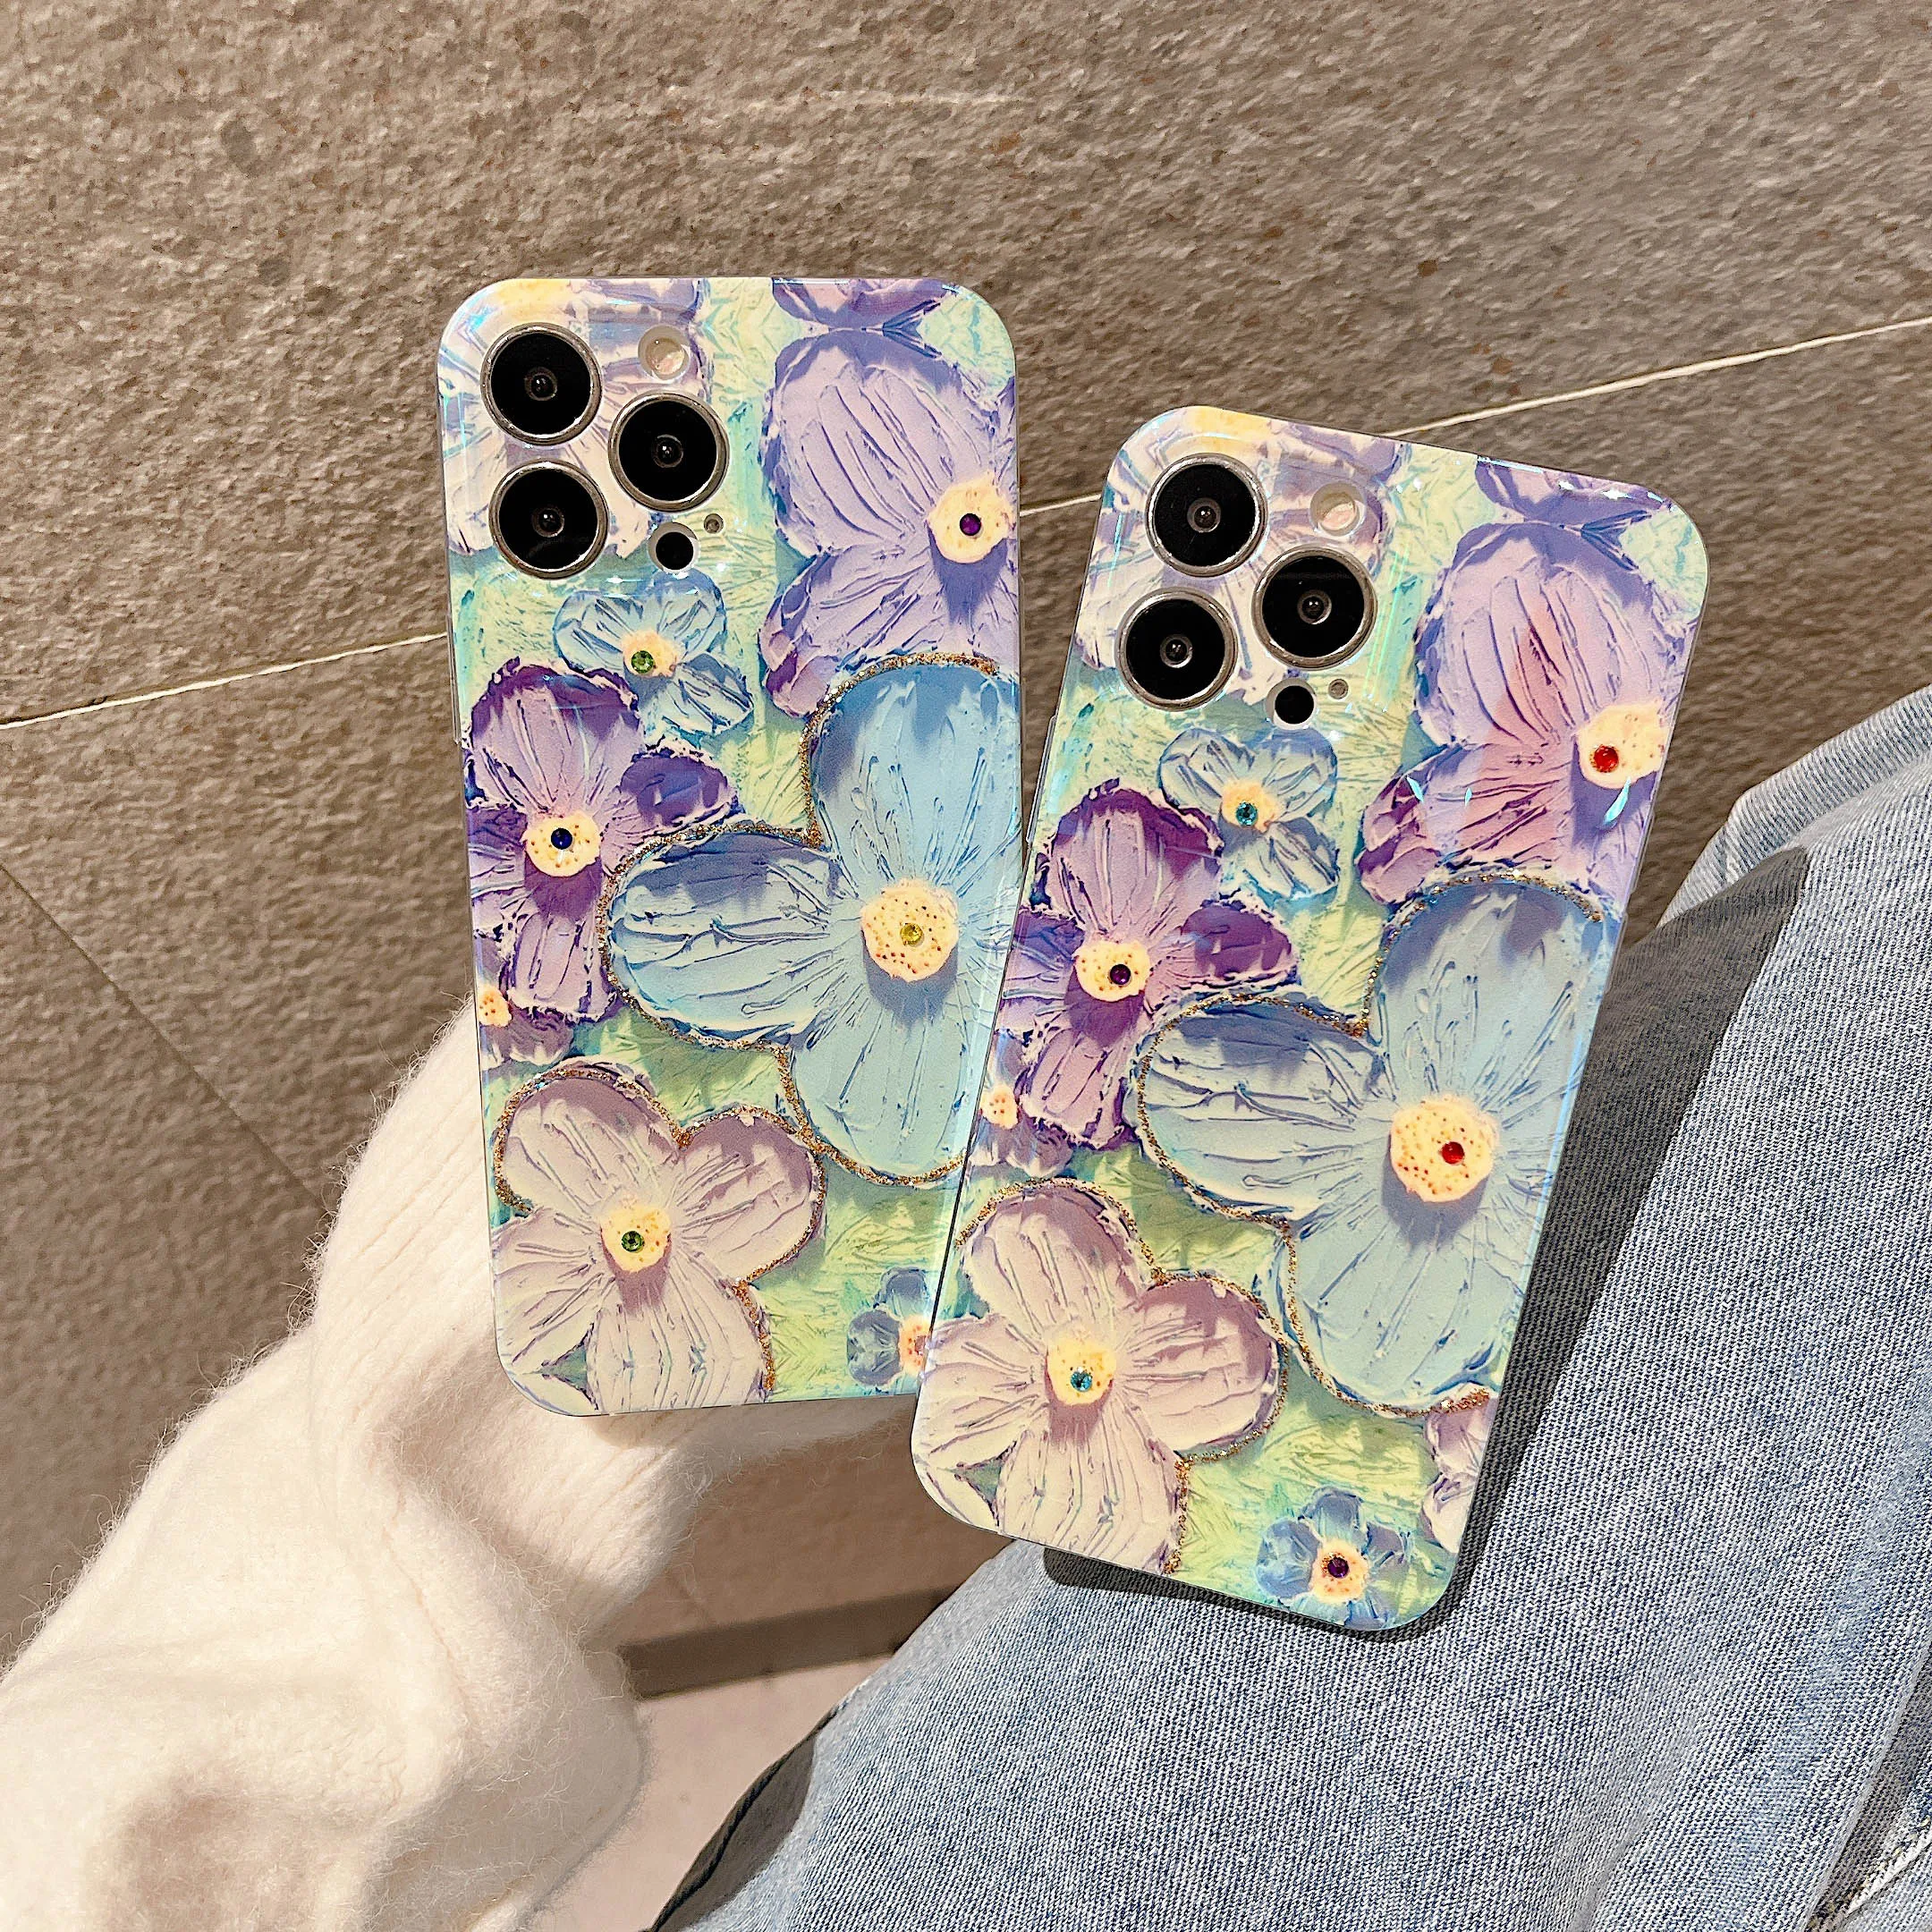 

Blu-ray Flowers Luxury Case For OPPO Realme C21Y C21 C35 C20 Shockproof Soft Silicone Cute Phone Cover for OPPO Realme 5 2 C3 C1